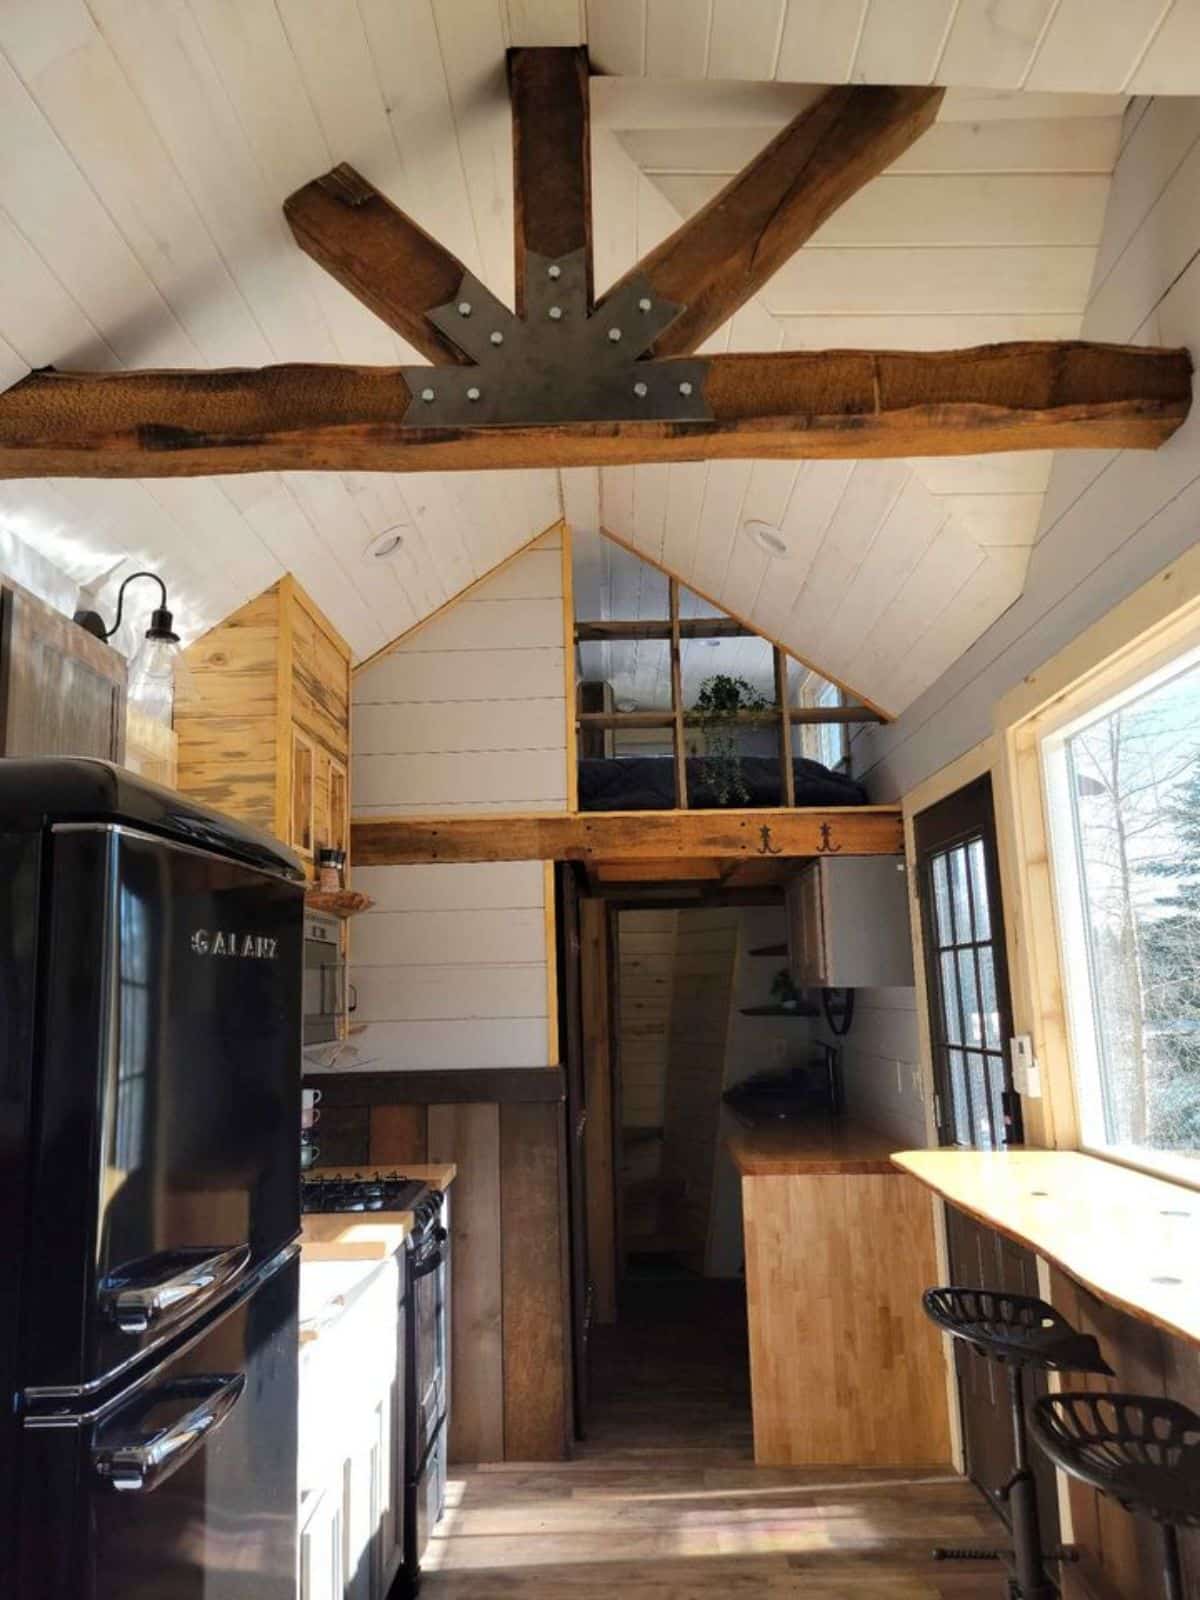 full length wooden interiors of 1 bedroom tiny house